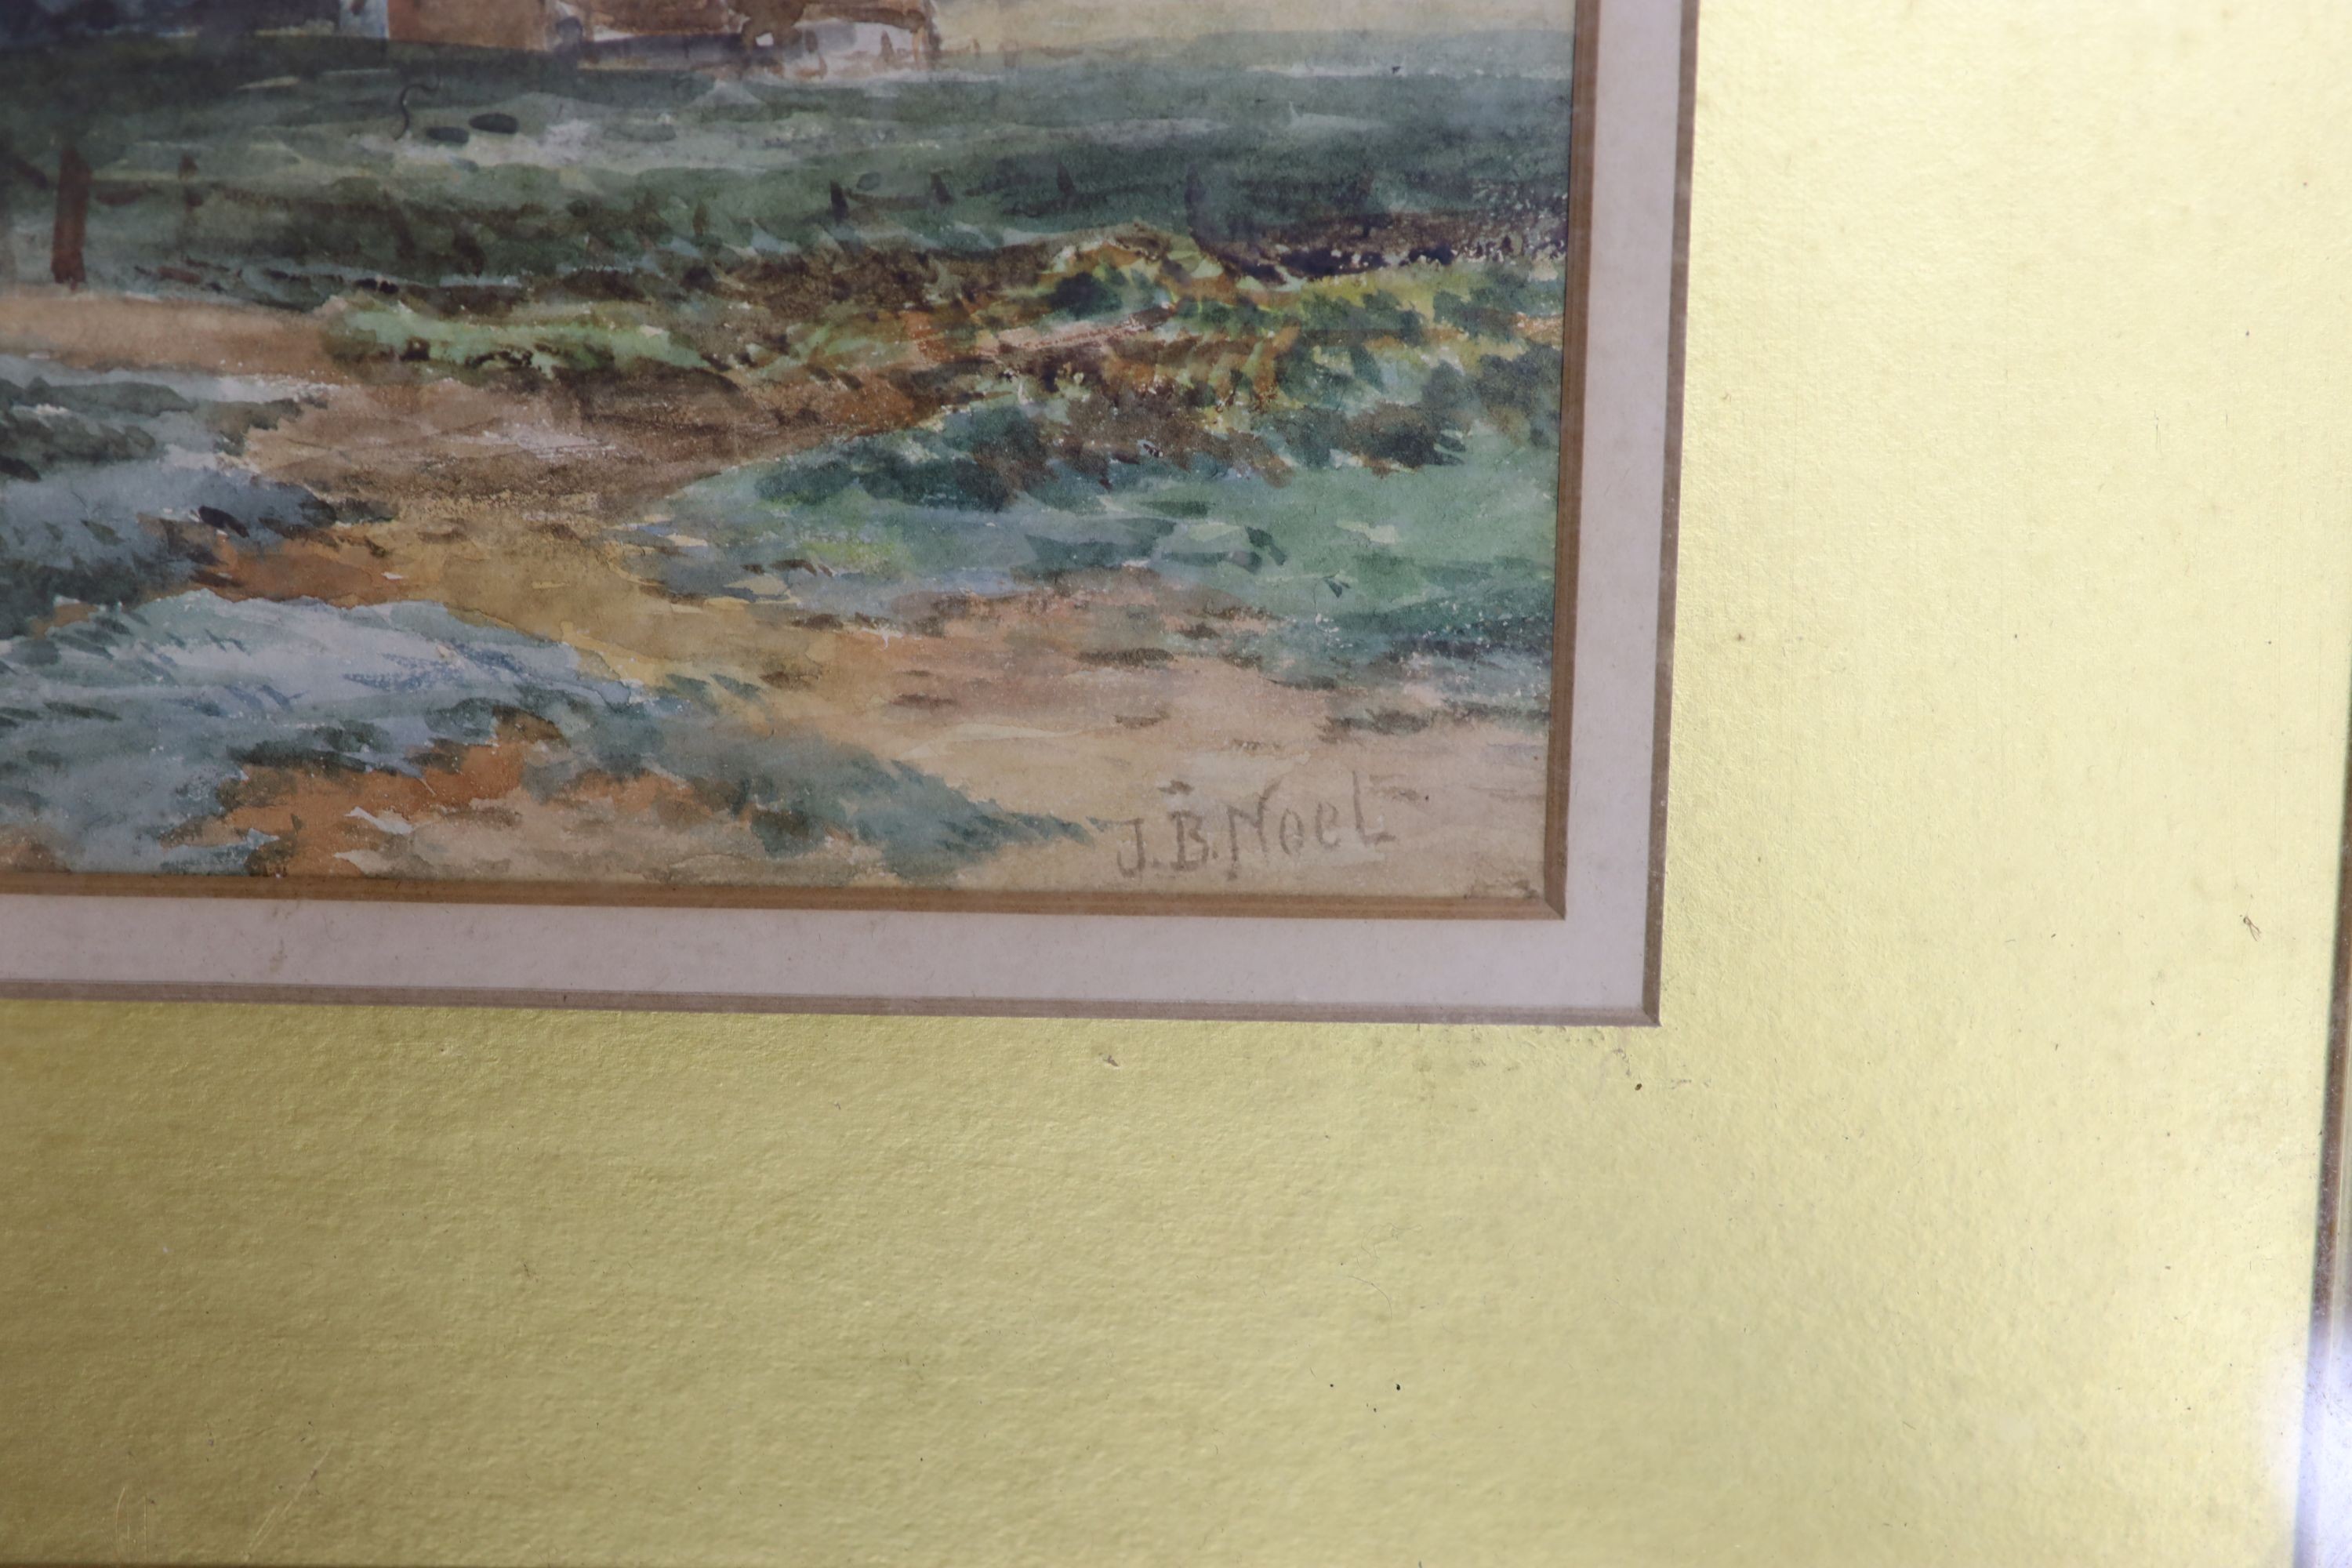 J.B. Noel, watercolour, Landscape with figure and cattle, signed, 18 x 26cm